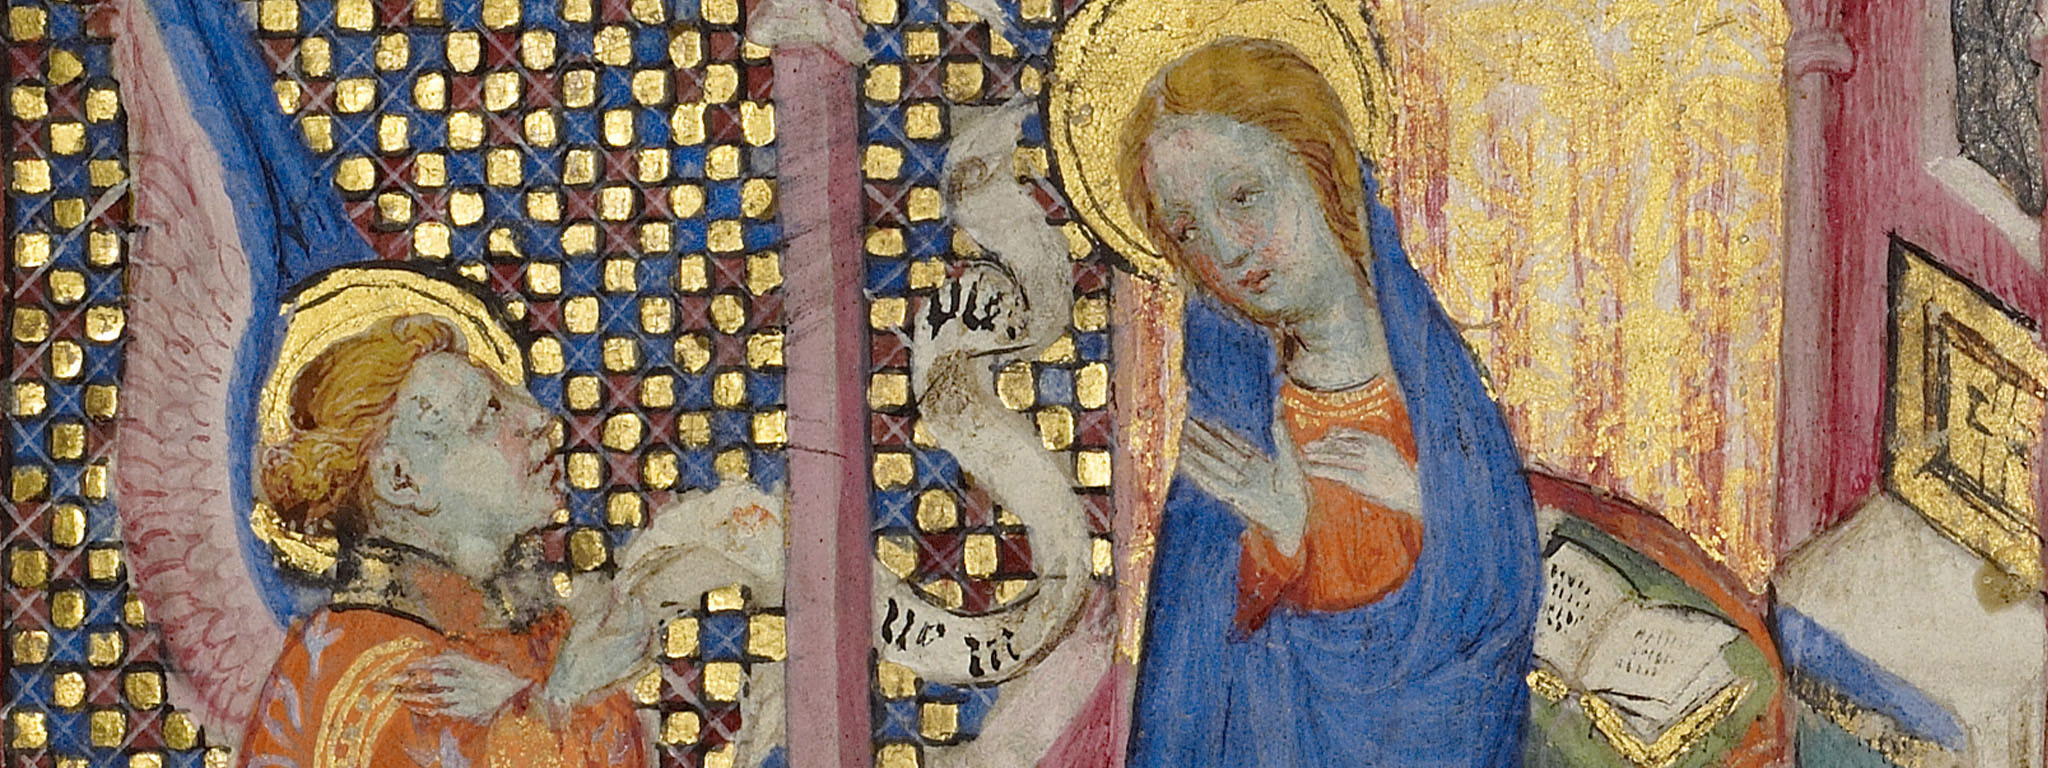 The Annunciation (detail), from a book of hours (text in Latin), Paris or Bourges, about 1390, artist unknown. The J. Paul Getty Museum